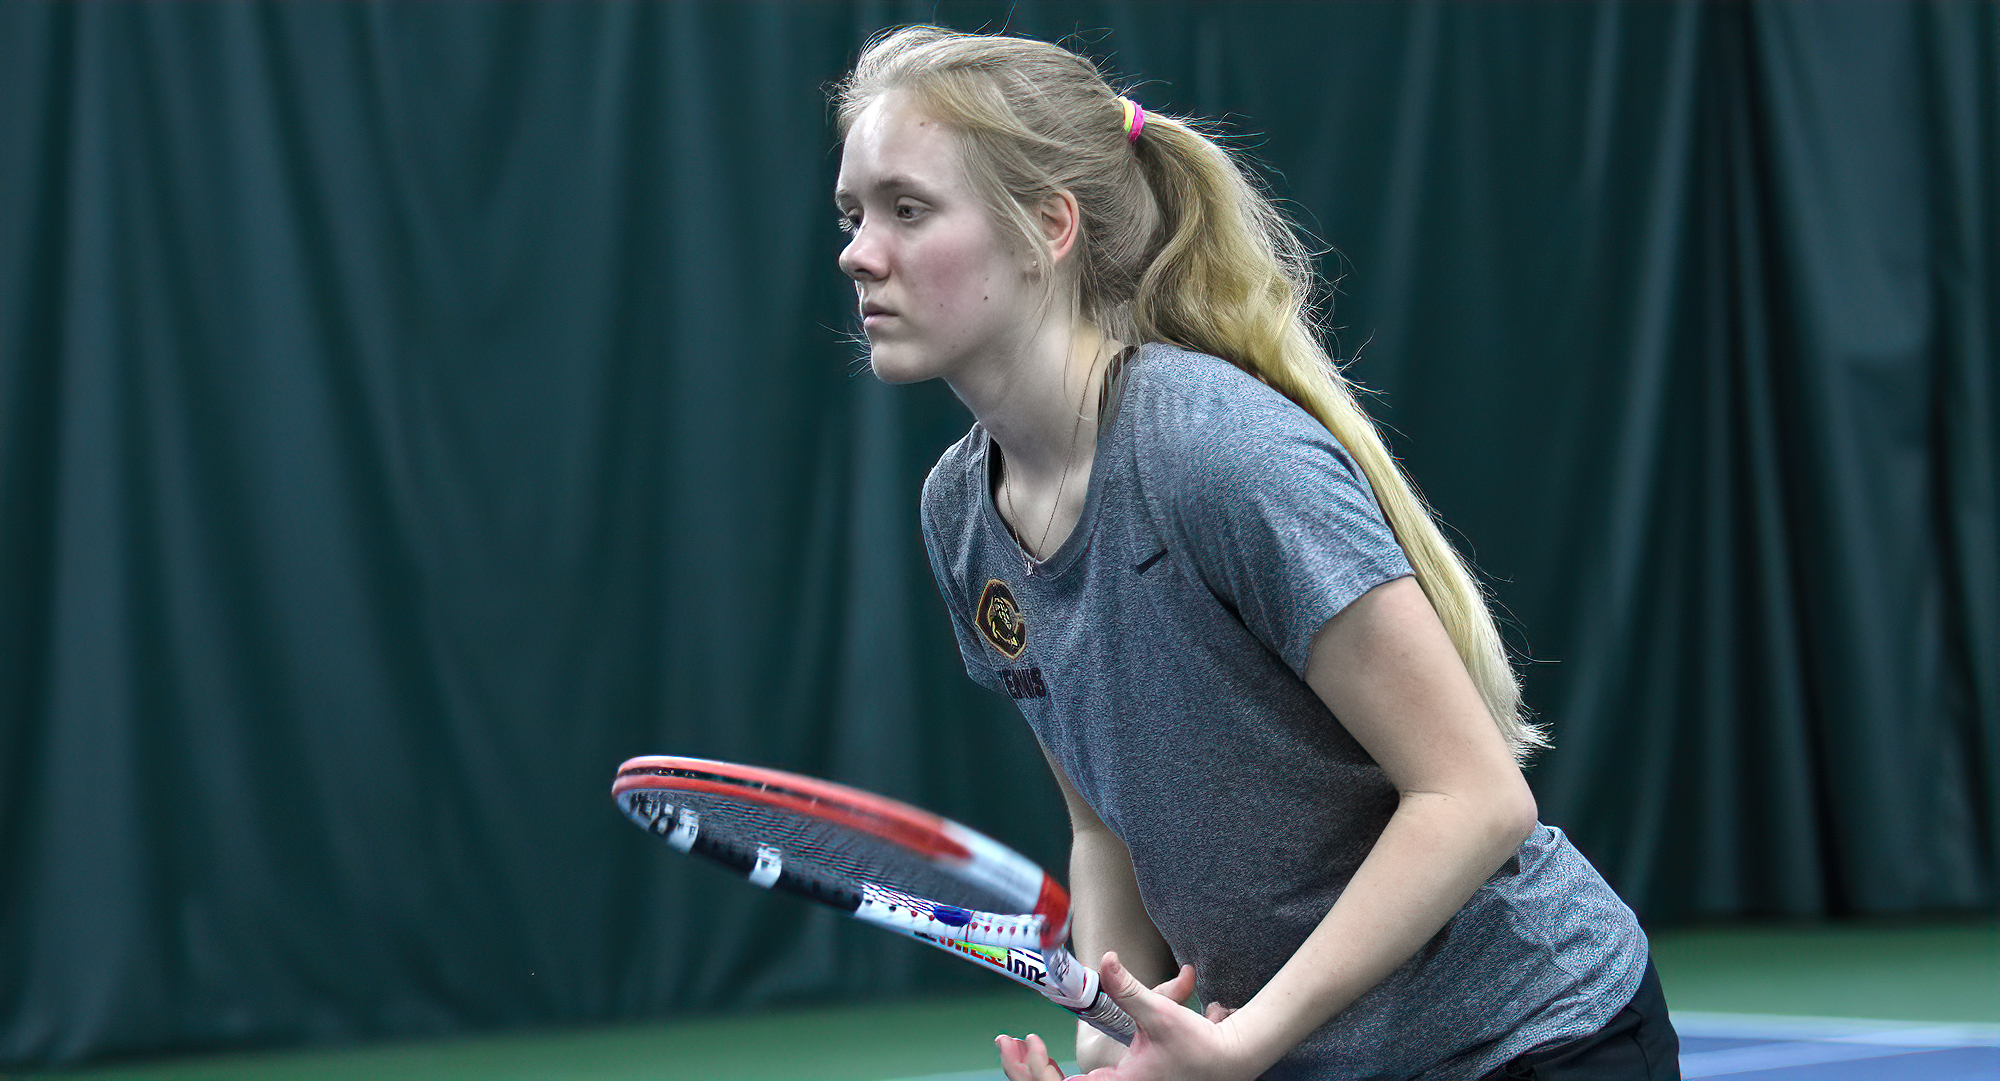 Freshman Erin Borchard won both her singles matches over the weekend and helped the Cobbers post an 8-1 over Superior.